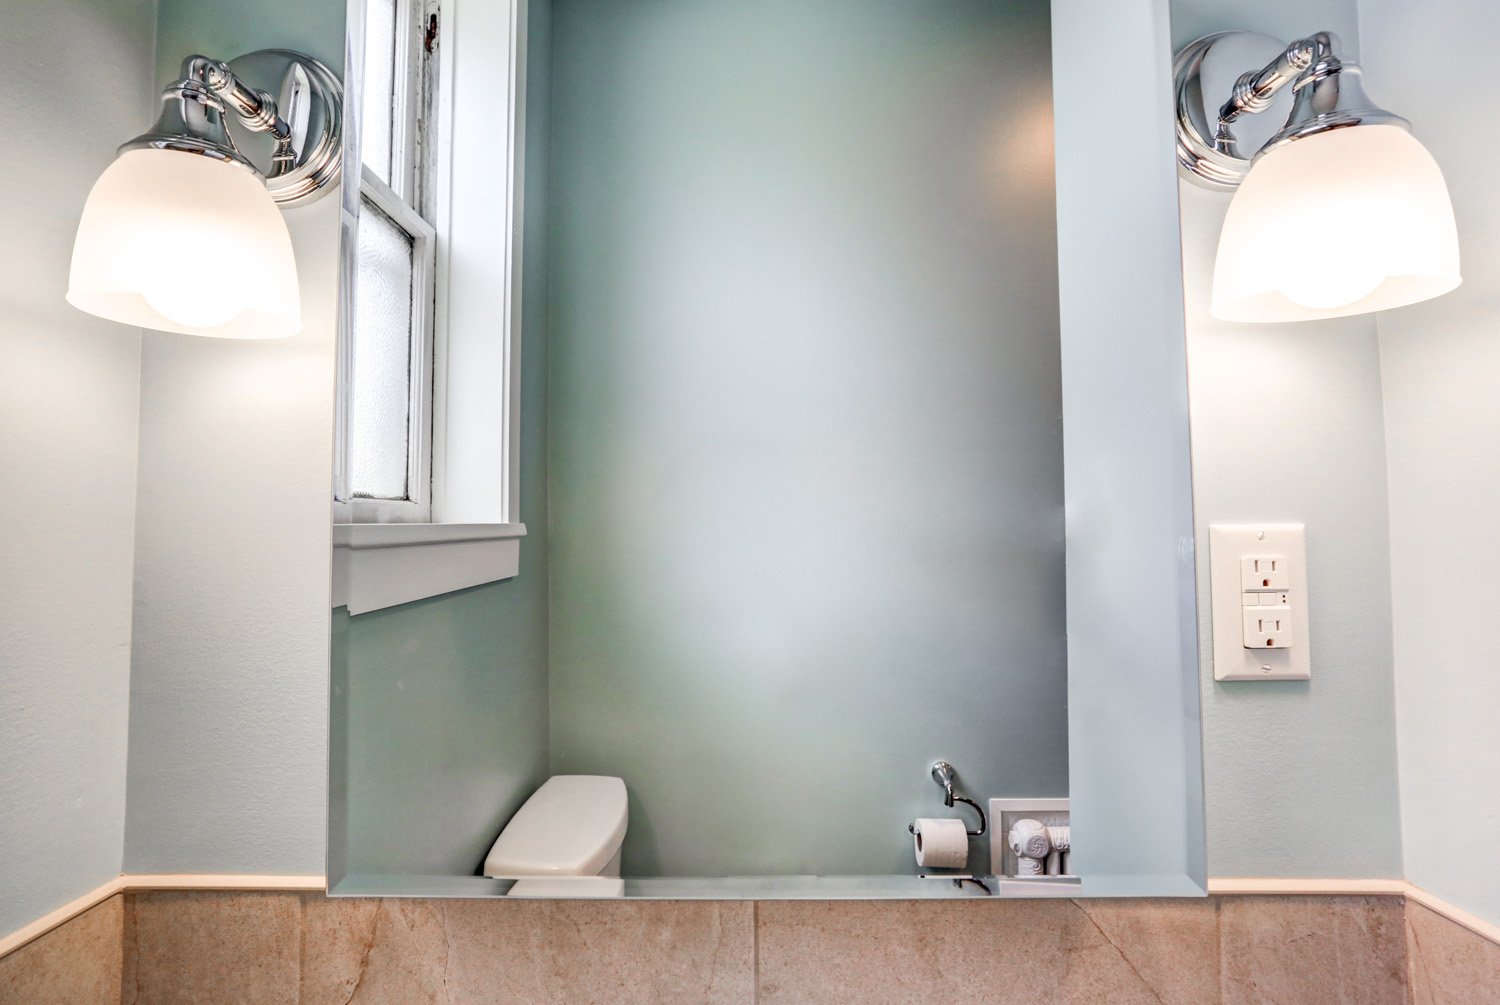 Medicine Cabinet mirror with chrome Wall sconces in Landisville Bathroom Remodel